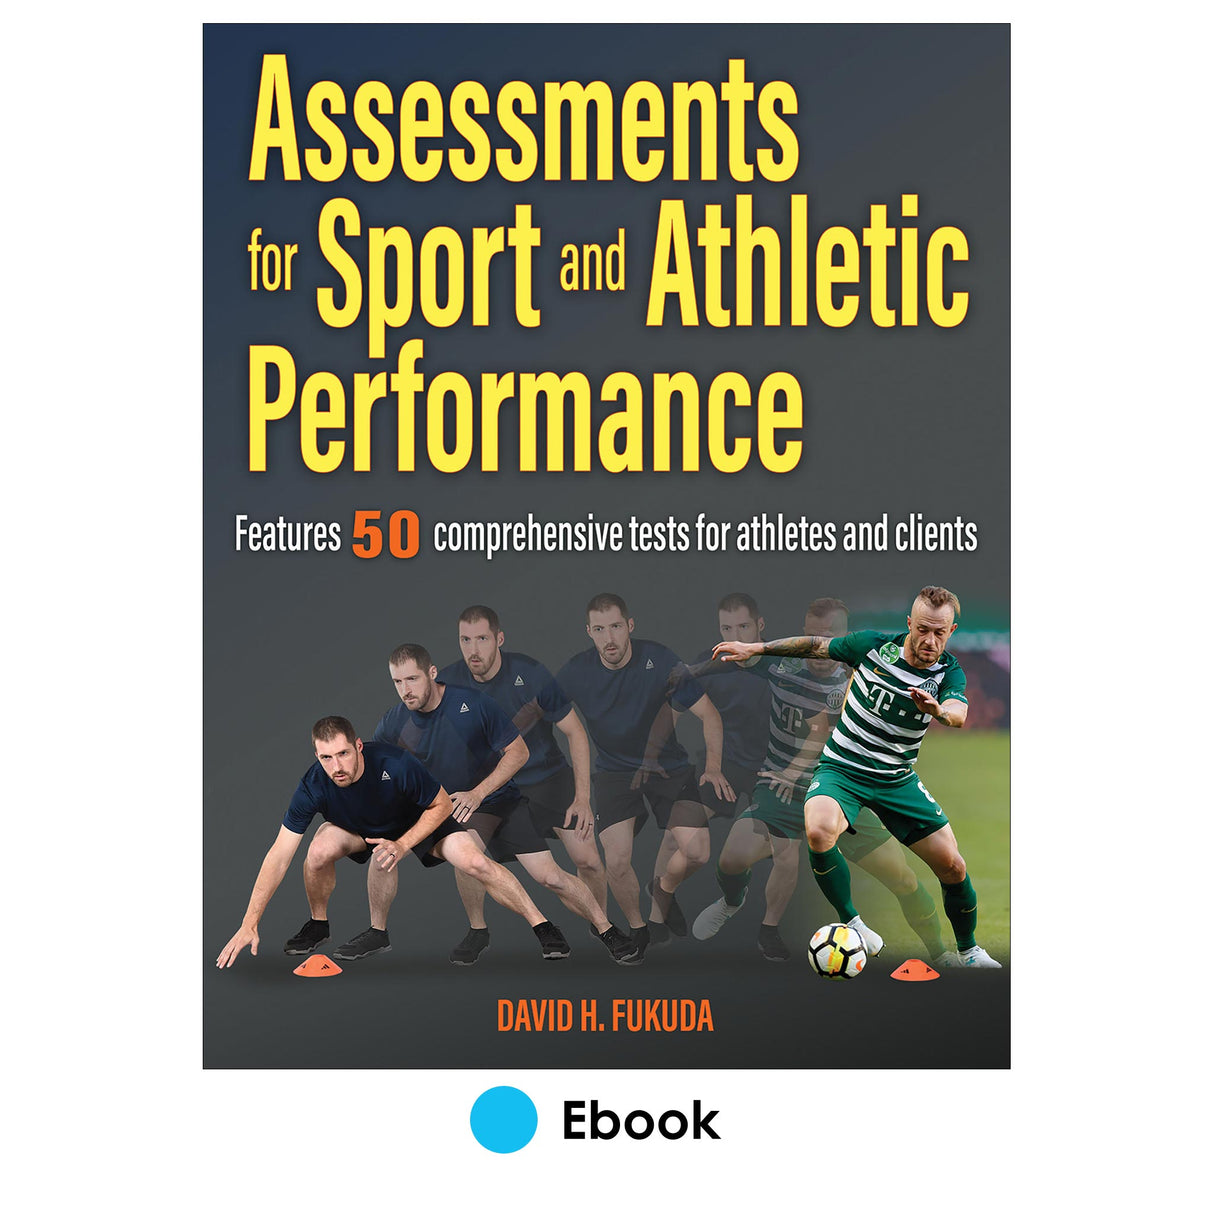 Assessments for Sport and Athletic Performance epub